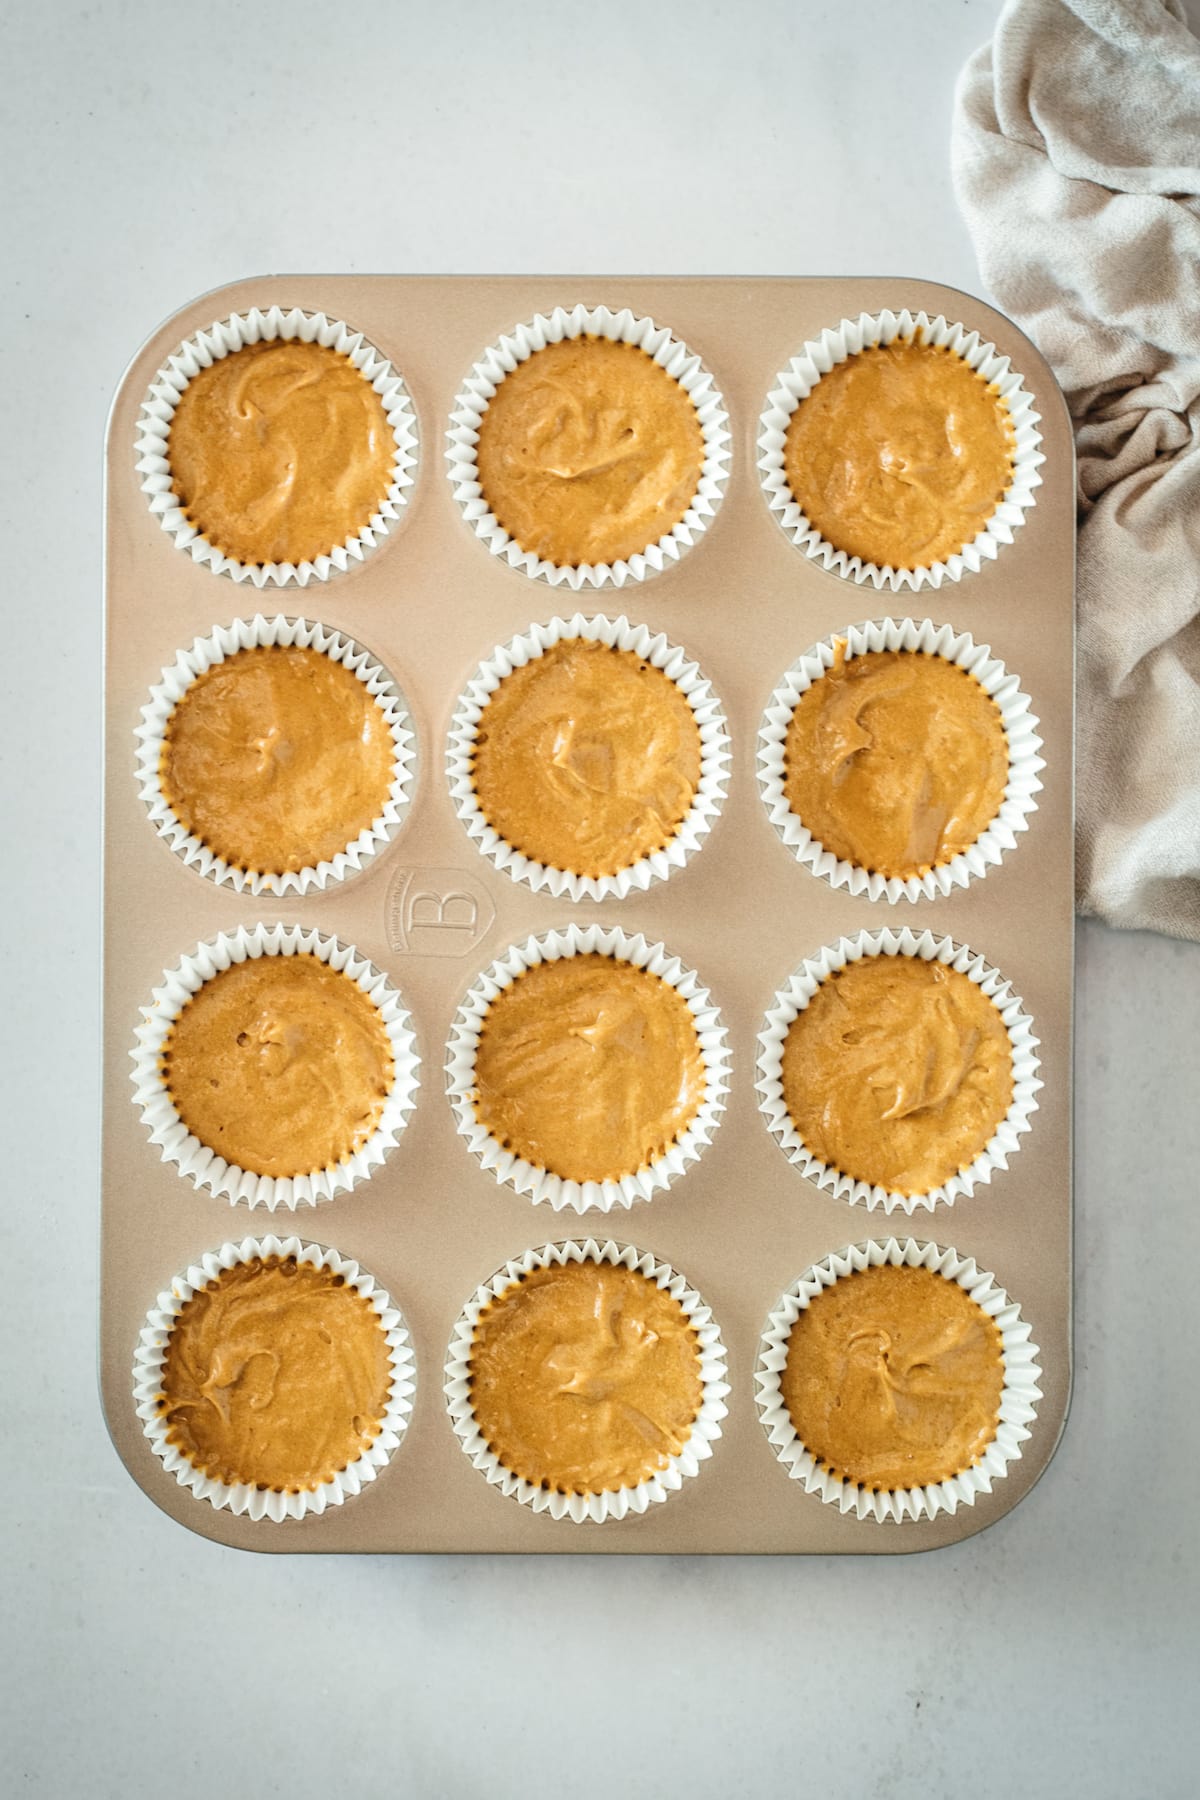 Overhead view of unbaked gingerbread cupcakes in muffin tin